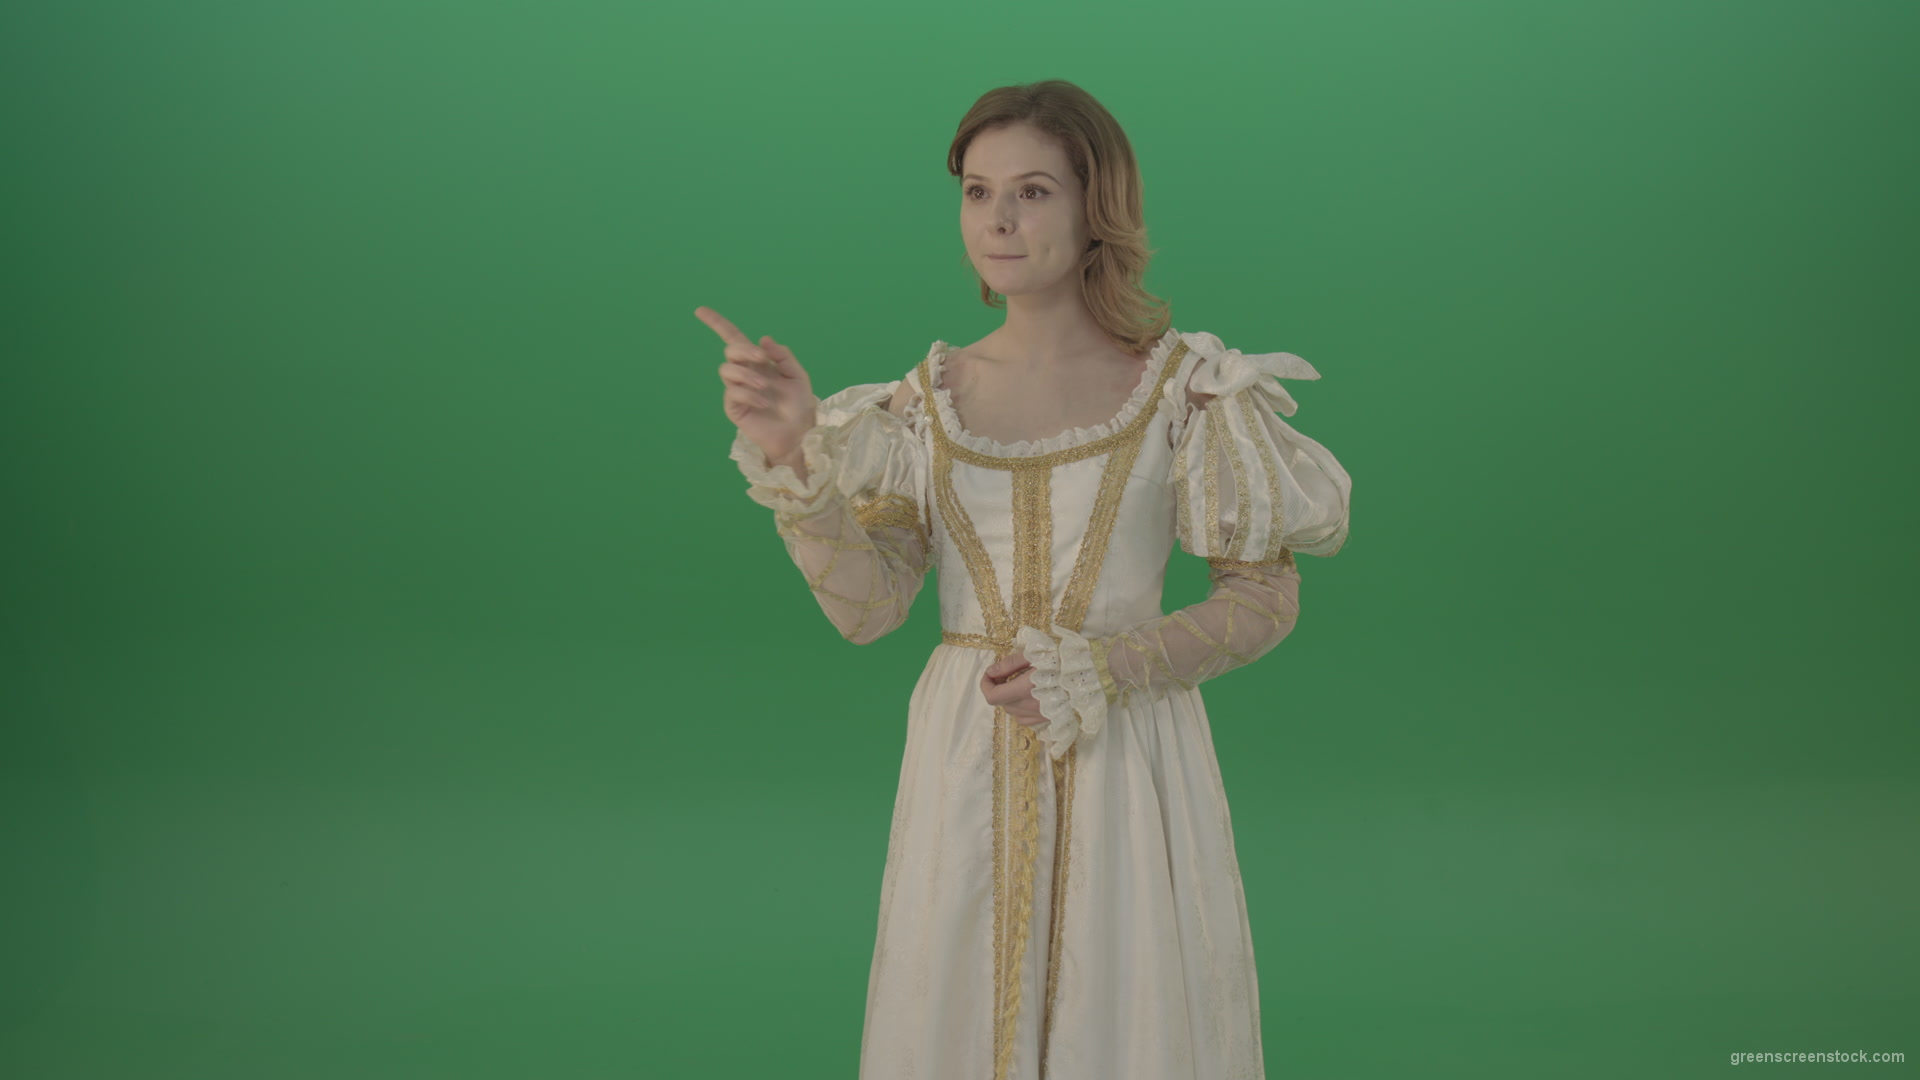 Girl-flips-a-virtual-screen-dressed-in-a-medieval-costume-isolated-on-green-screen_004 Green Screen Stock